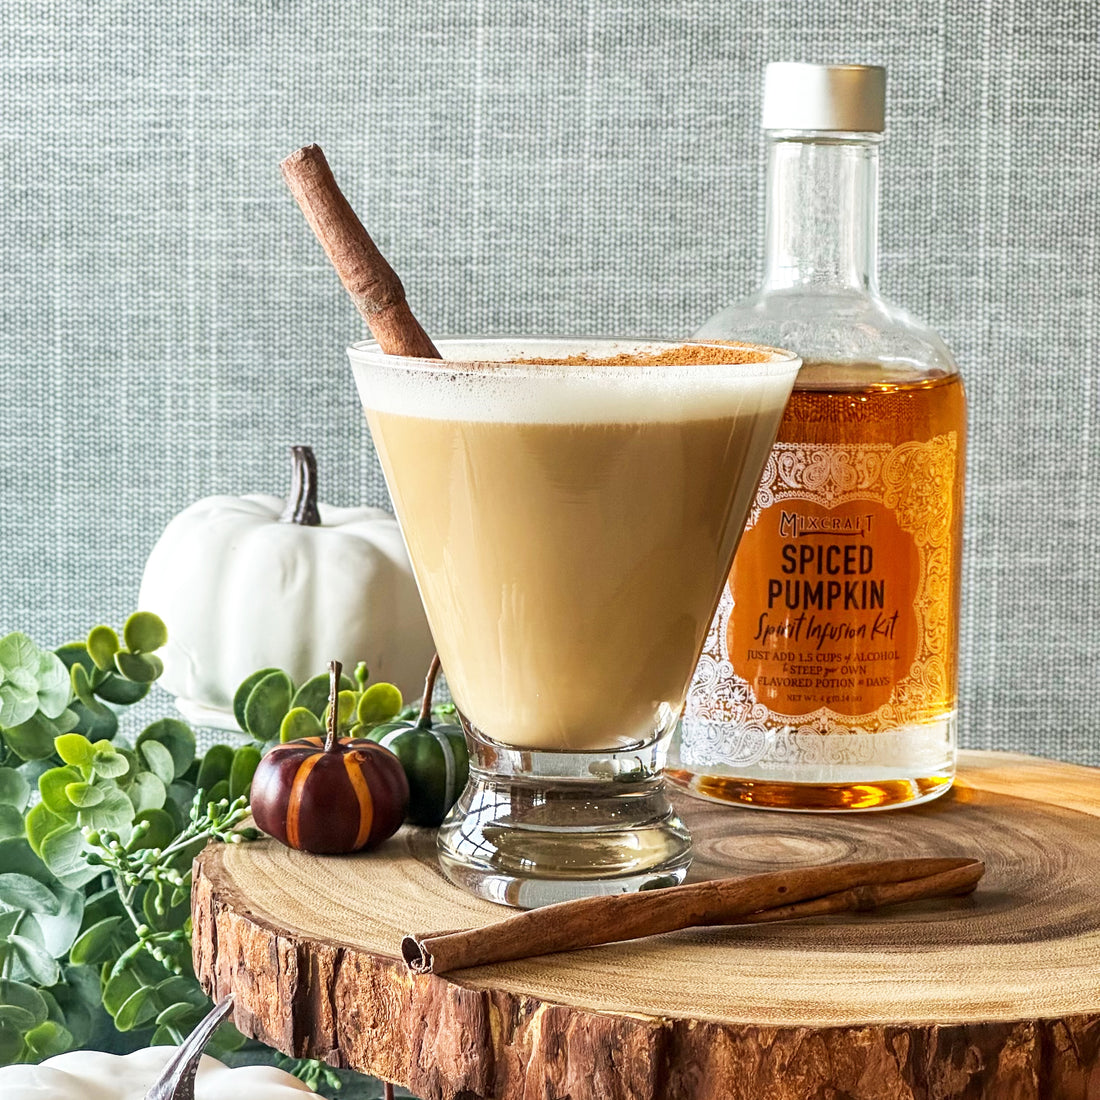 Use the Spiced Pumpkin refill packet to craft The Basic Witch cocktail- the best fall flavor we've ever feasted our tastebuds on